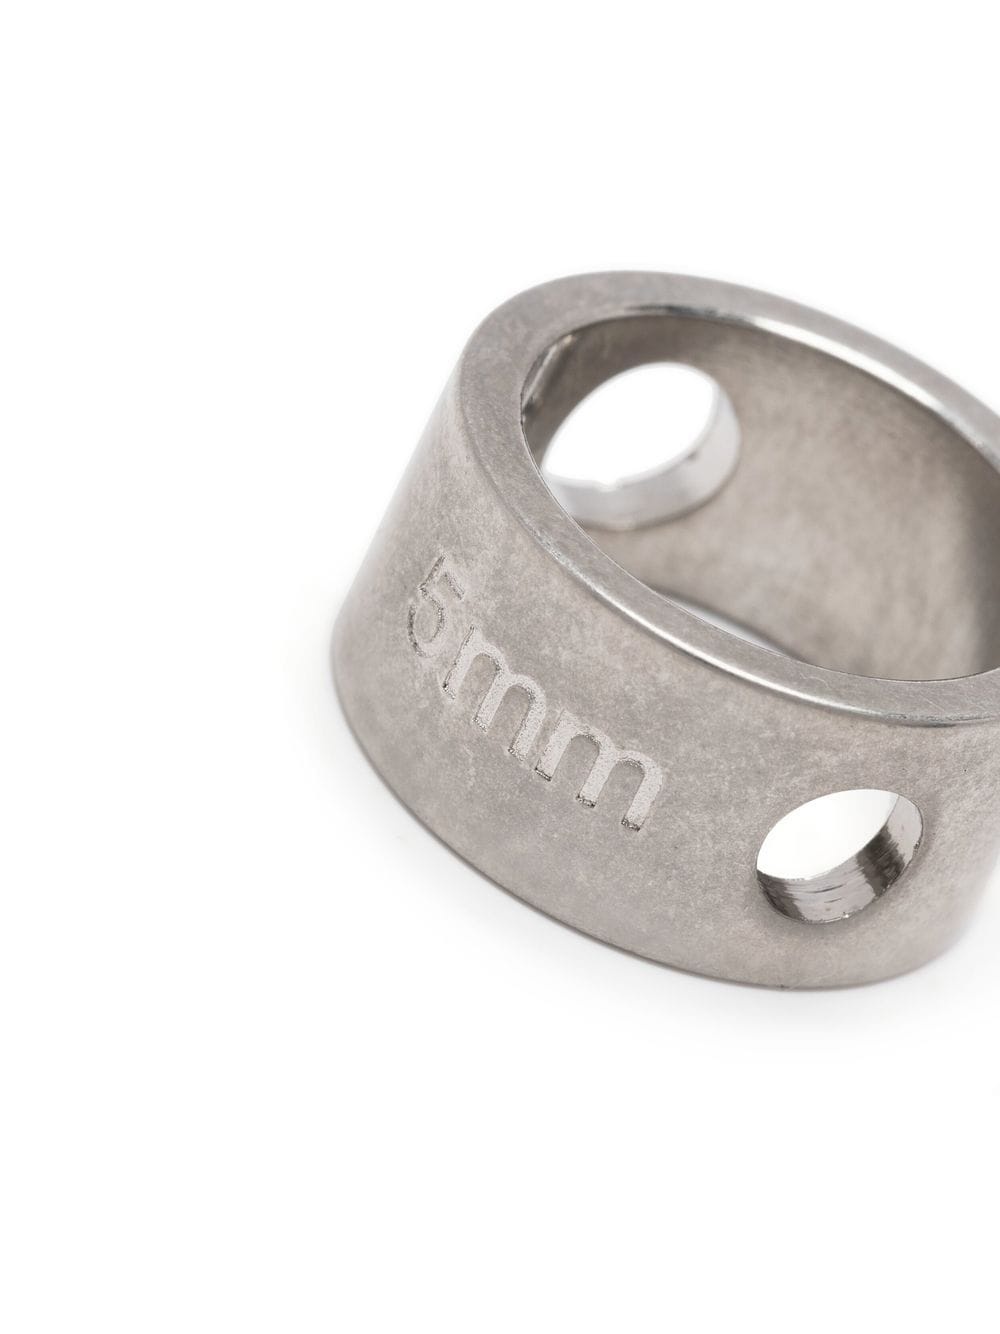 engraved band ring - 3